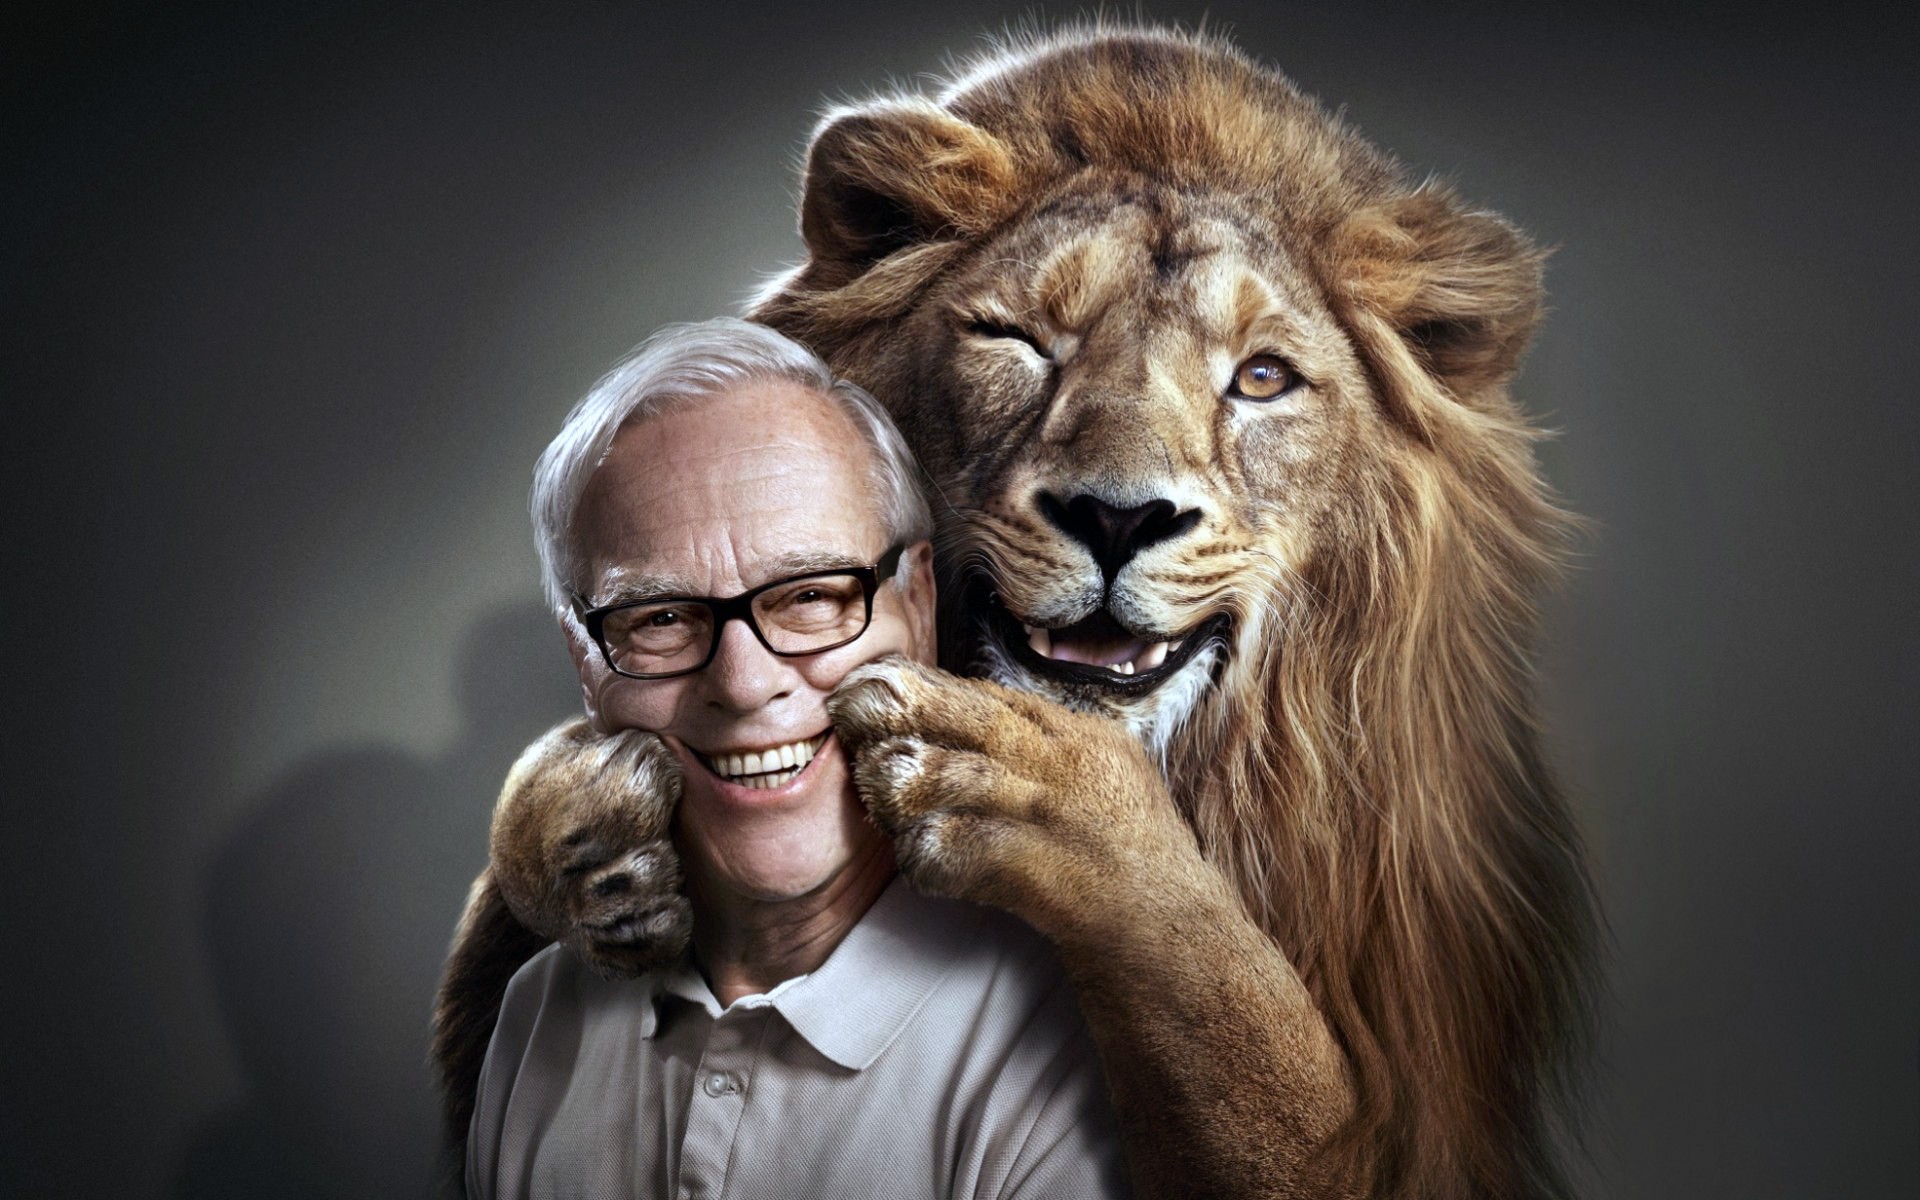 General 1920x1200 animals old people men lion smiling photo manipulation gray background glasses humor big cats mammals digital art simple background nature men with glasses teeth